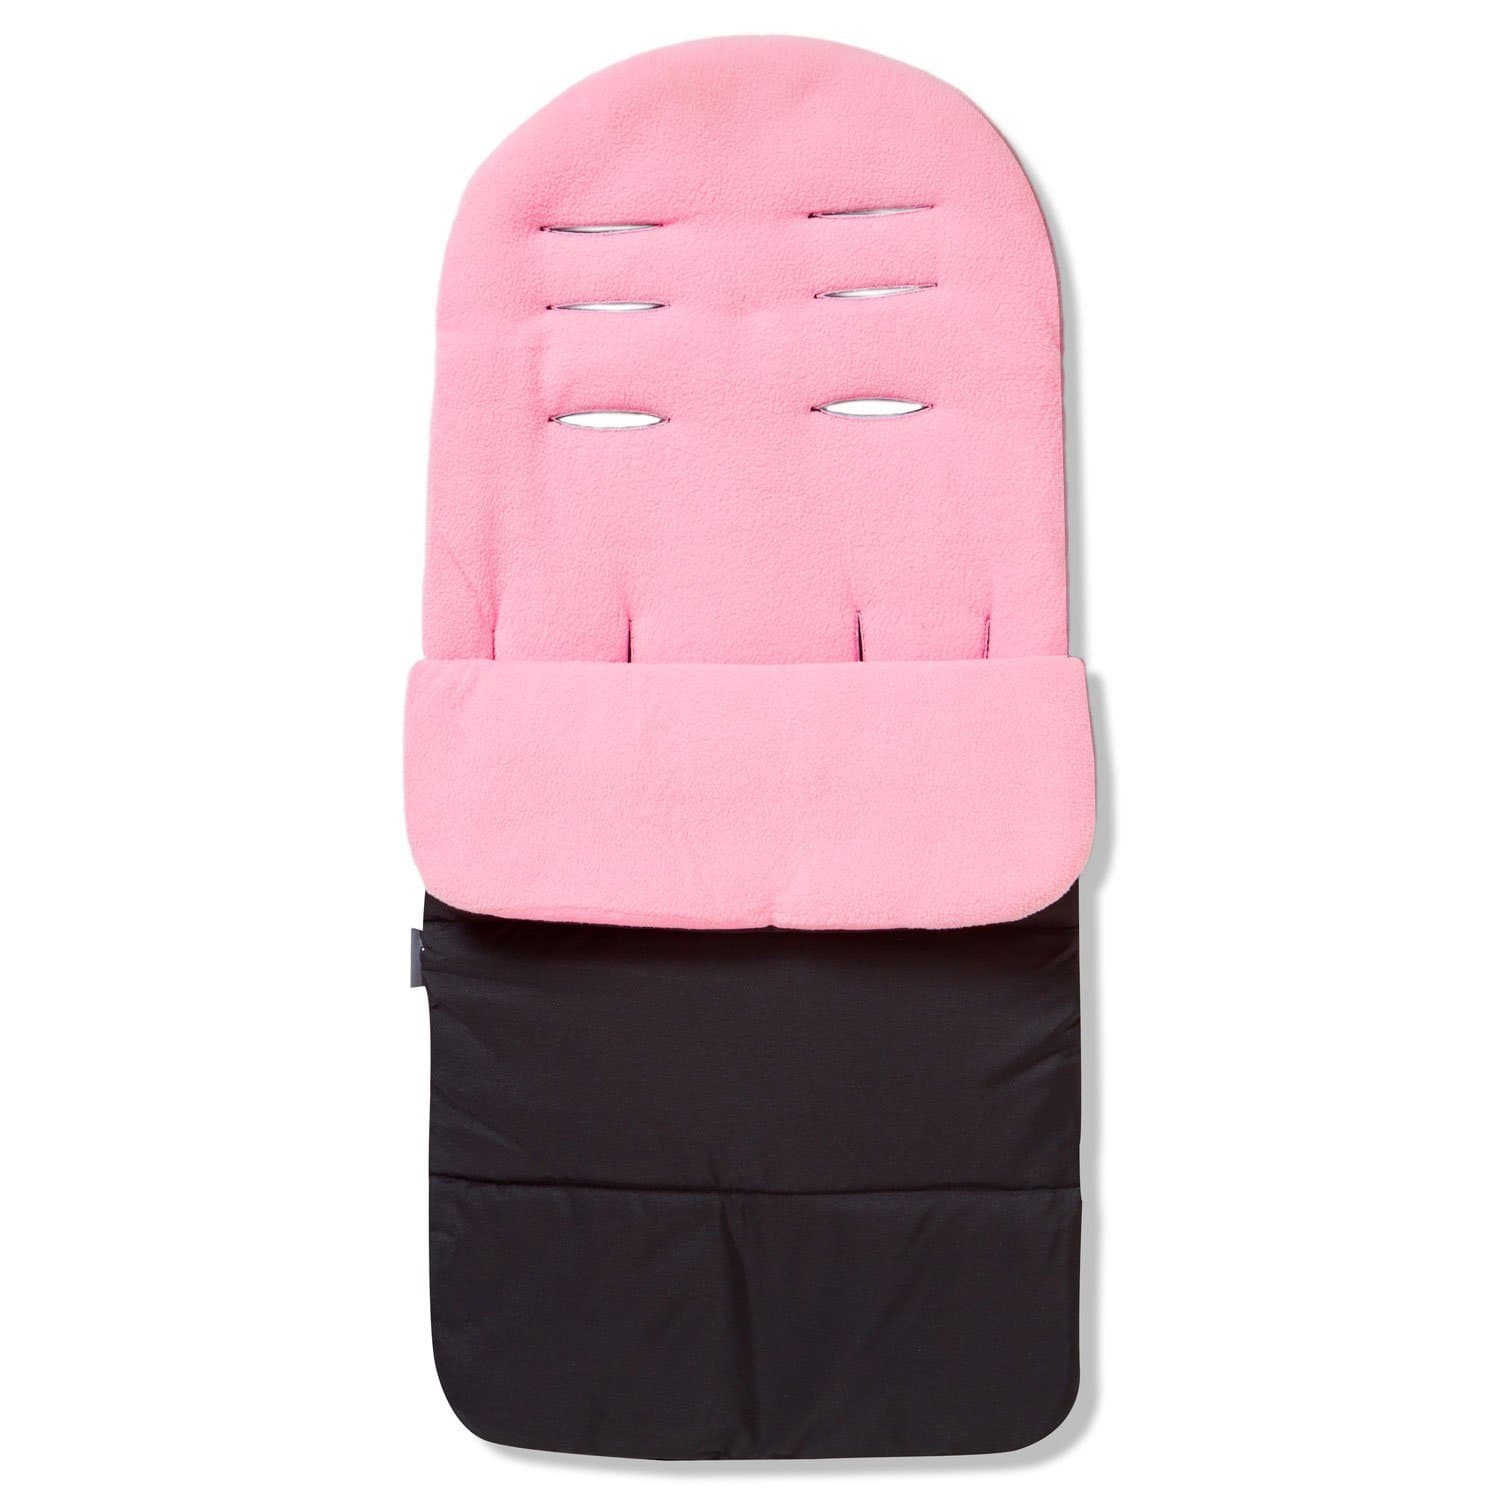 Premium Footmuff / Cosy Toes Compatible with Urban Detour - Candy Pink / Fits All Models | For Your Little One